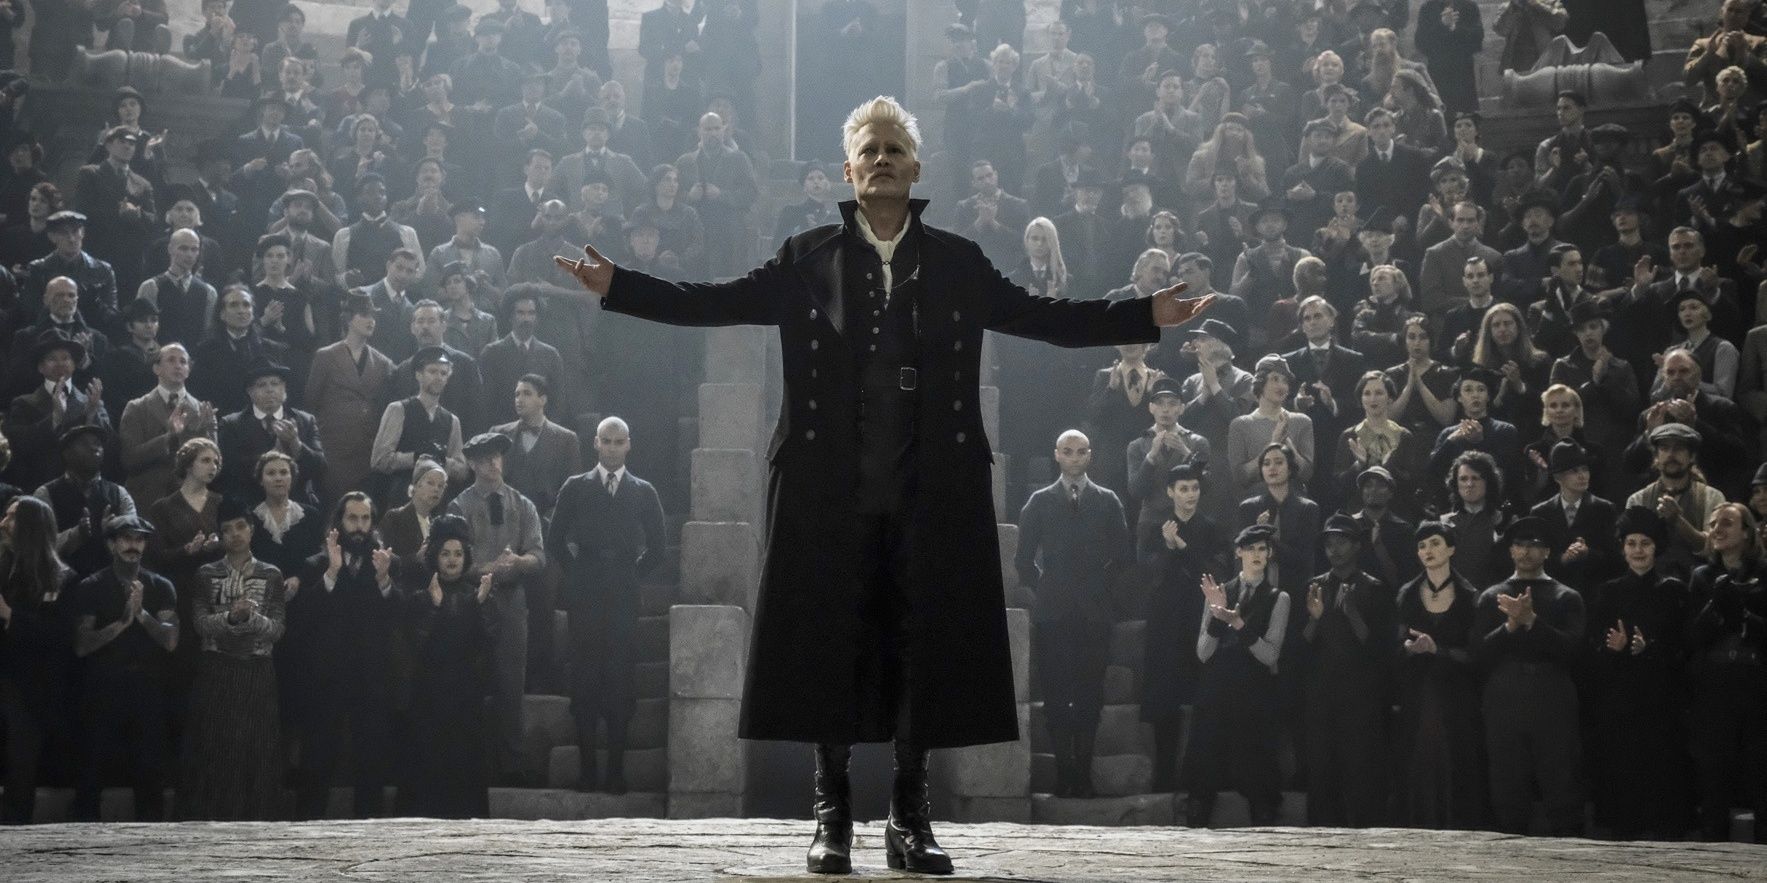 Grindelwald speaking to a crowd of people in Harry Potter. 